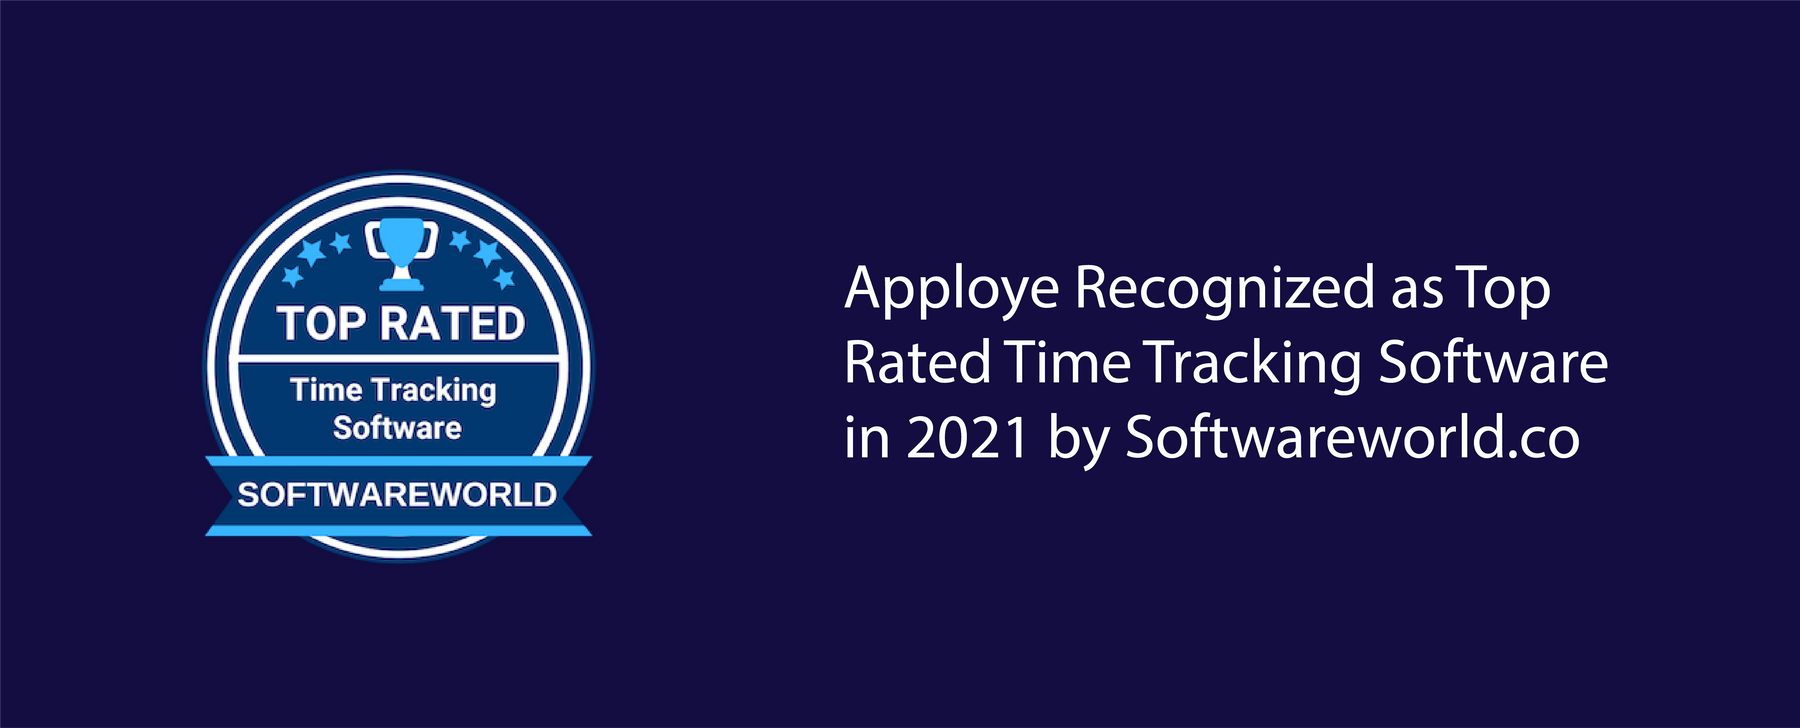 SoftwareWorld Featured Apploye in Top 10+ Time Tracking Software in 2021